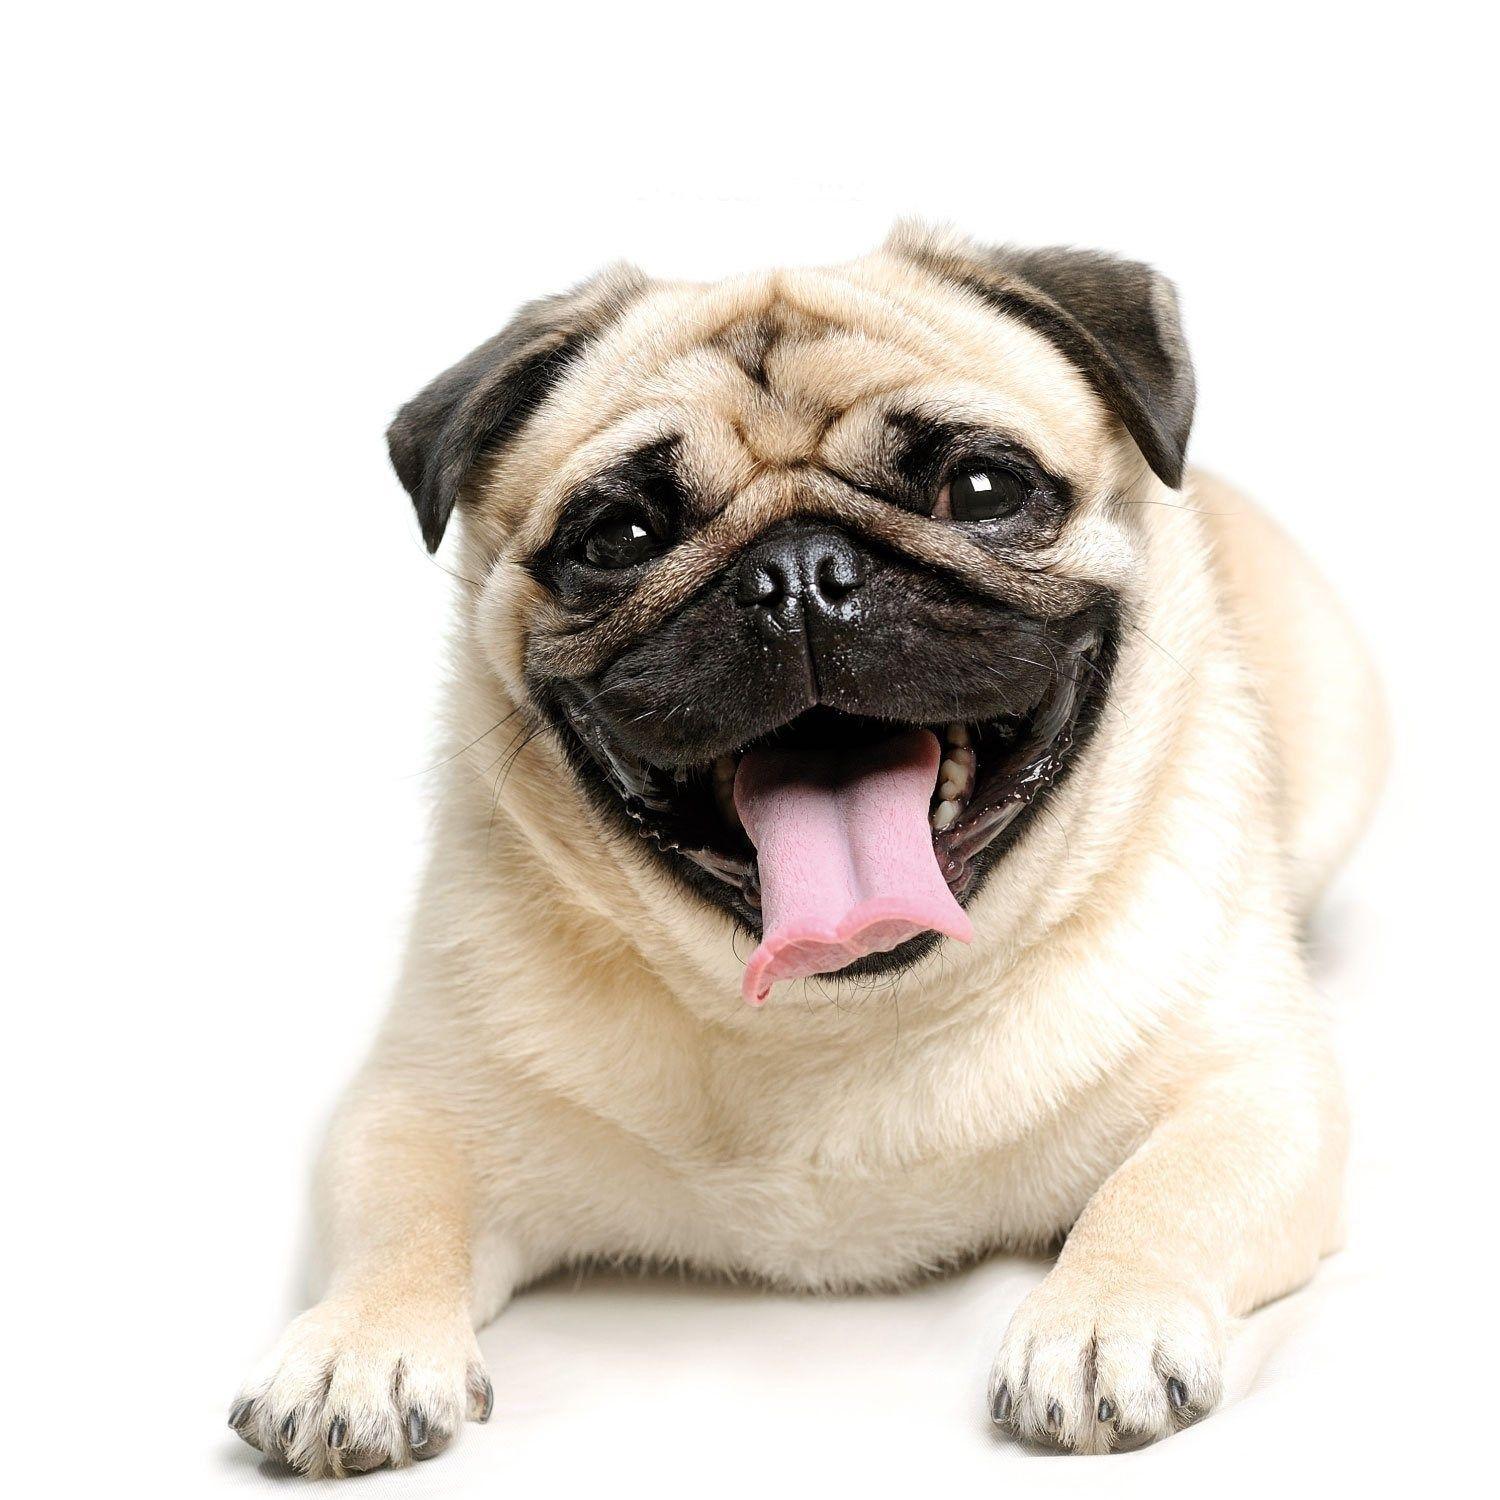 Pug Dog Club Of America National Names Male In India Rescue Price